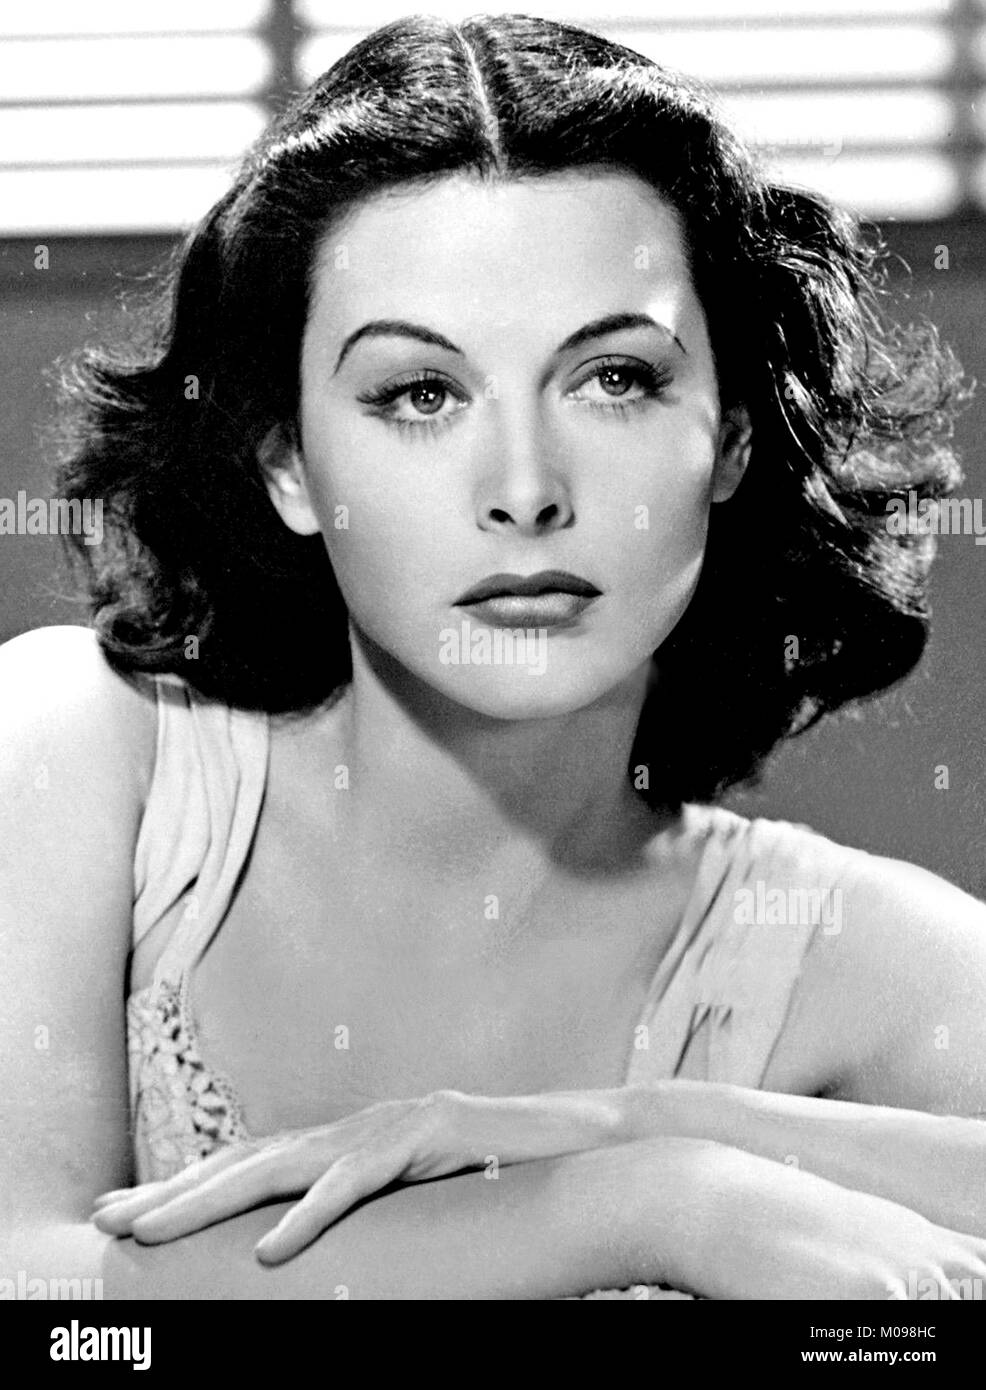 Hedy Lamarr (Hedwig Eva Maria Kiesler: 1914-2000), publicity photograph of the Austrian born American actress and inventor, taken for the film Comrade X, 1940. Stock Photo